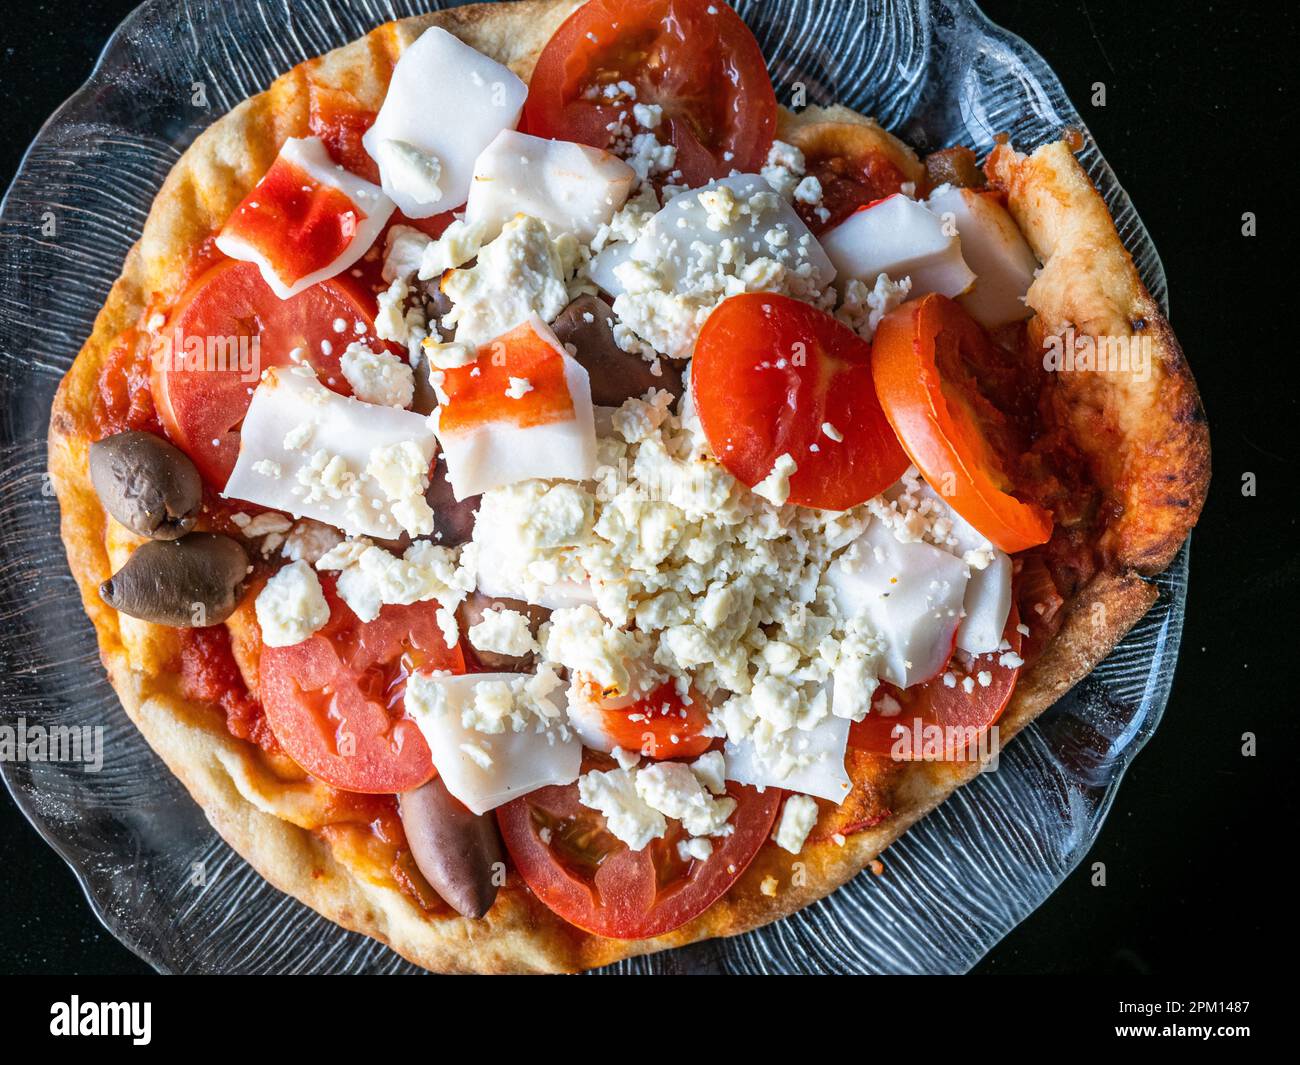 This delicious home made pizza is fairly healthy. It's made of naan bread, tomatoes, black calamata (kalamata) olives, crab sticks and feta cheese. Stock Photo